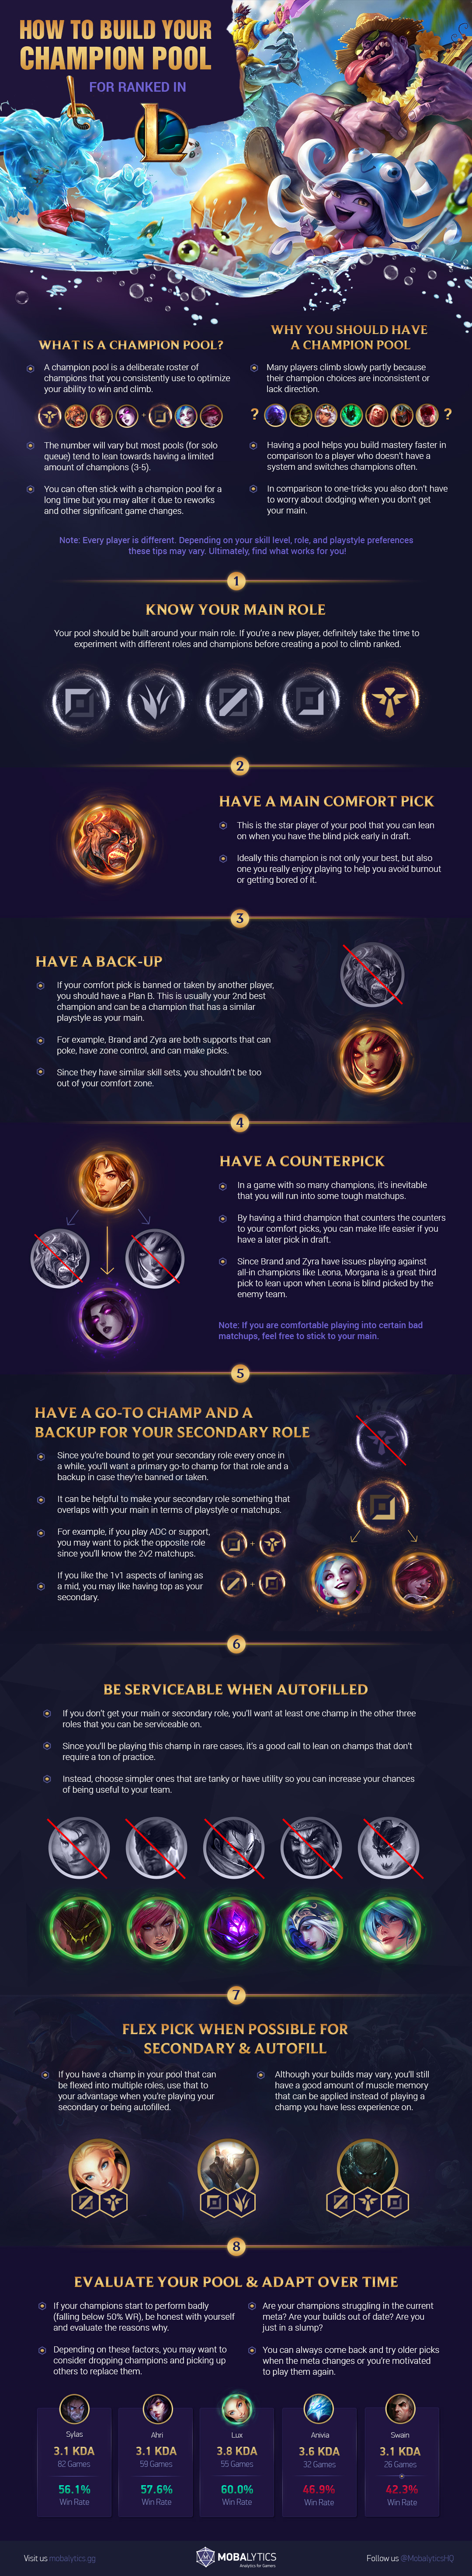 How to Build your Champion Pool